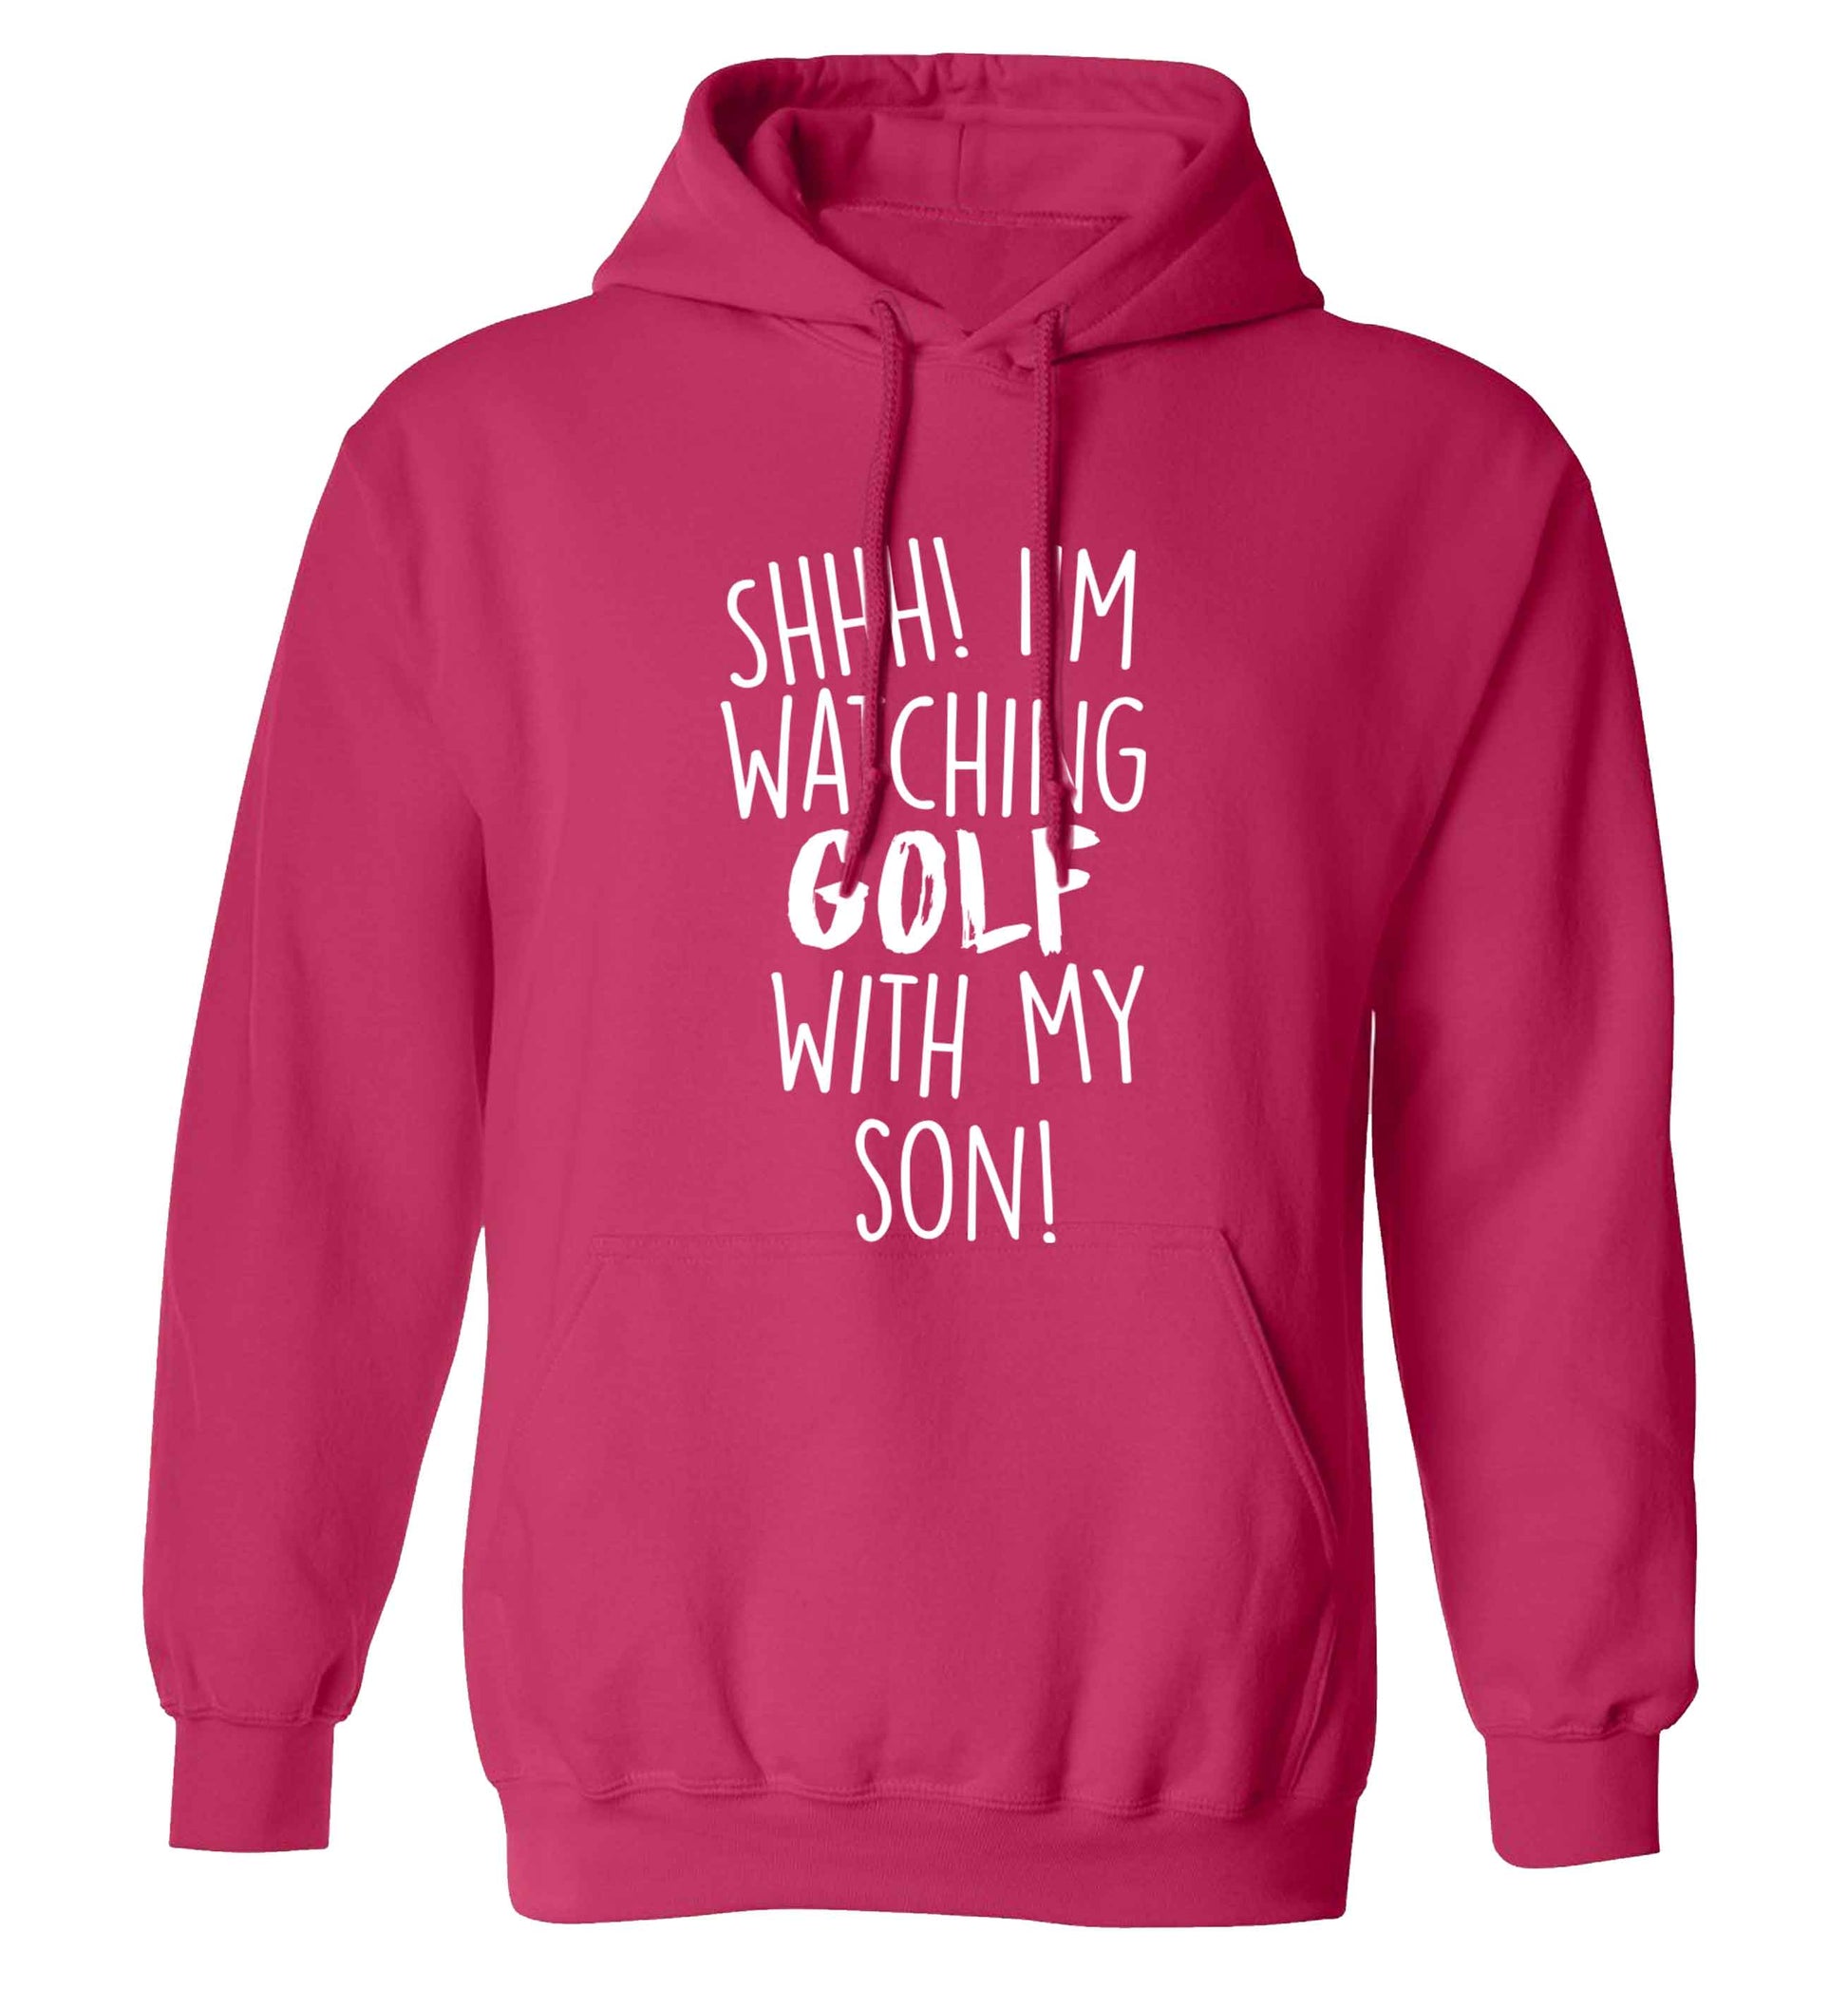 Shh I'm watching golf with my son adults unisex pink hoodie 2XL